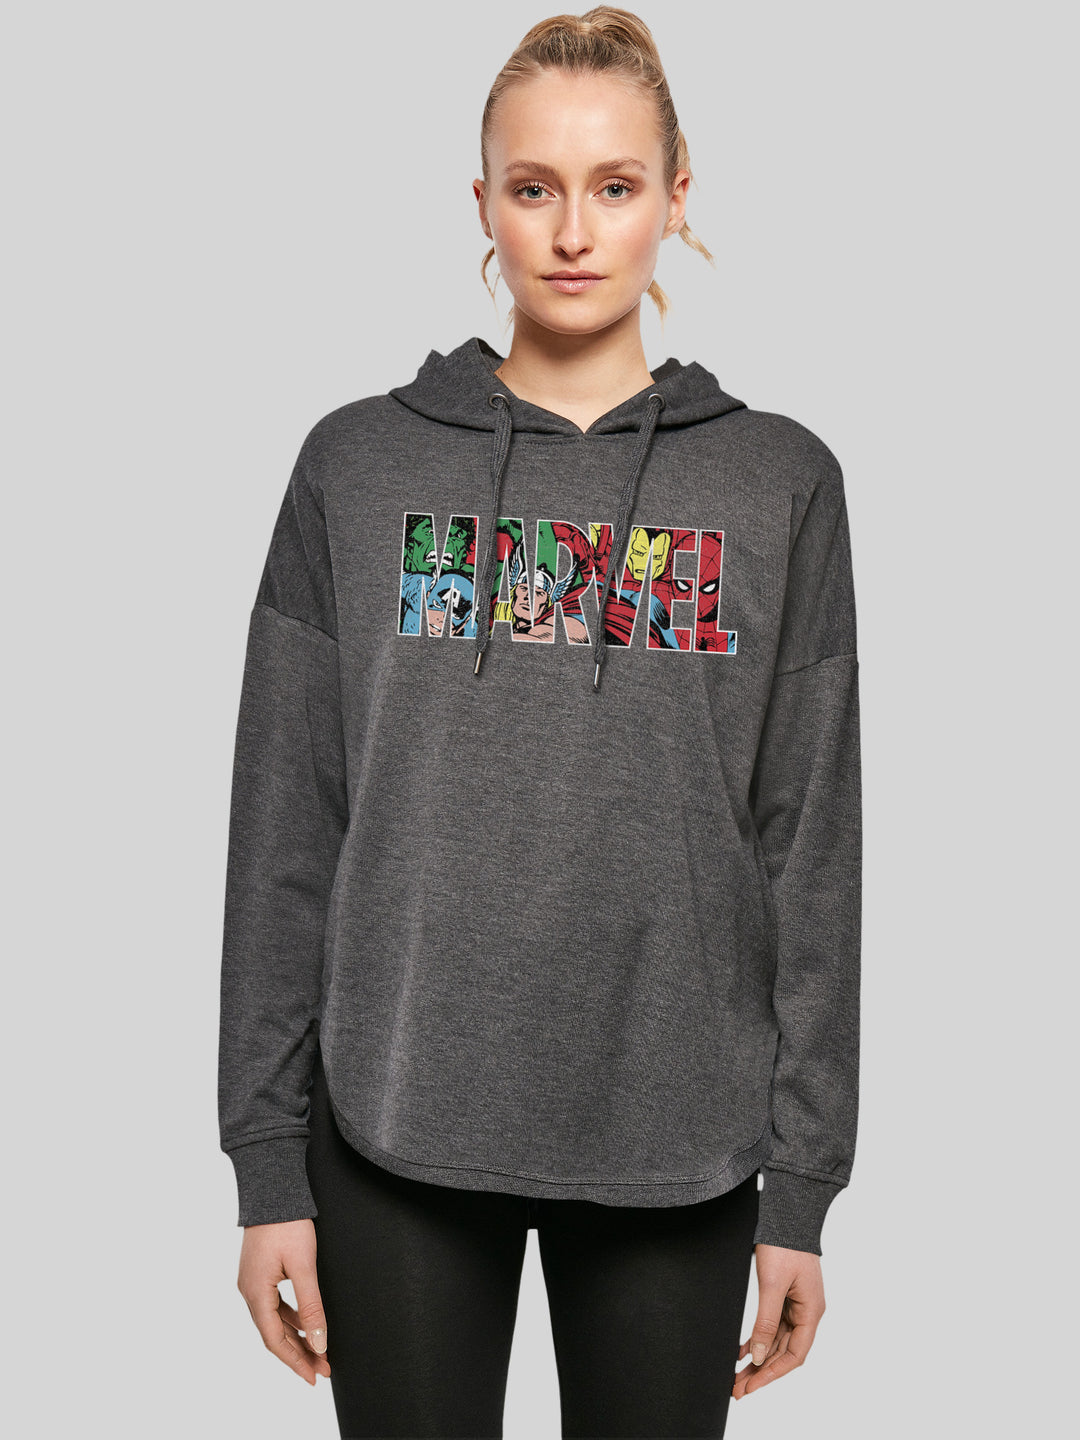 Marvel Avengers Logo Character infill - Color with Ladies Oversized Hoody